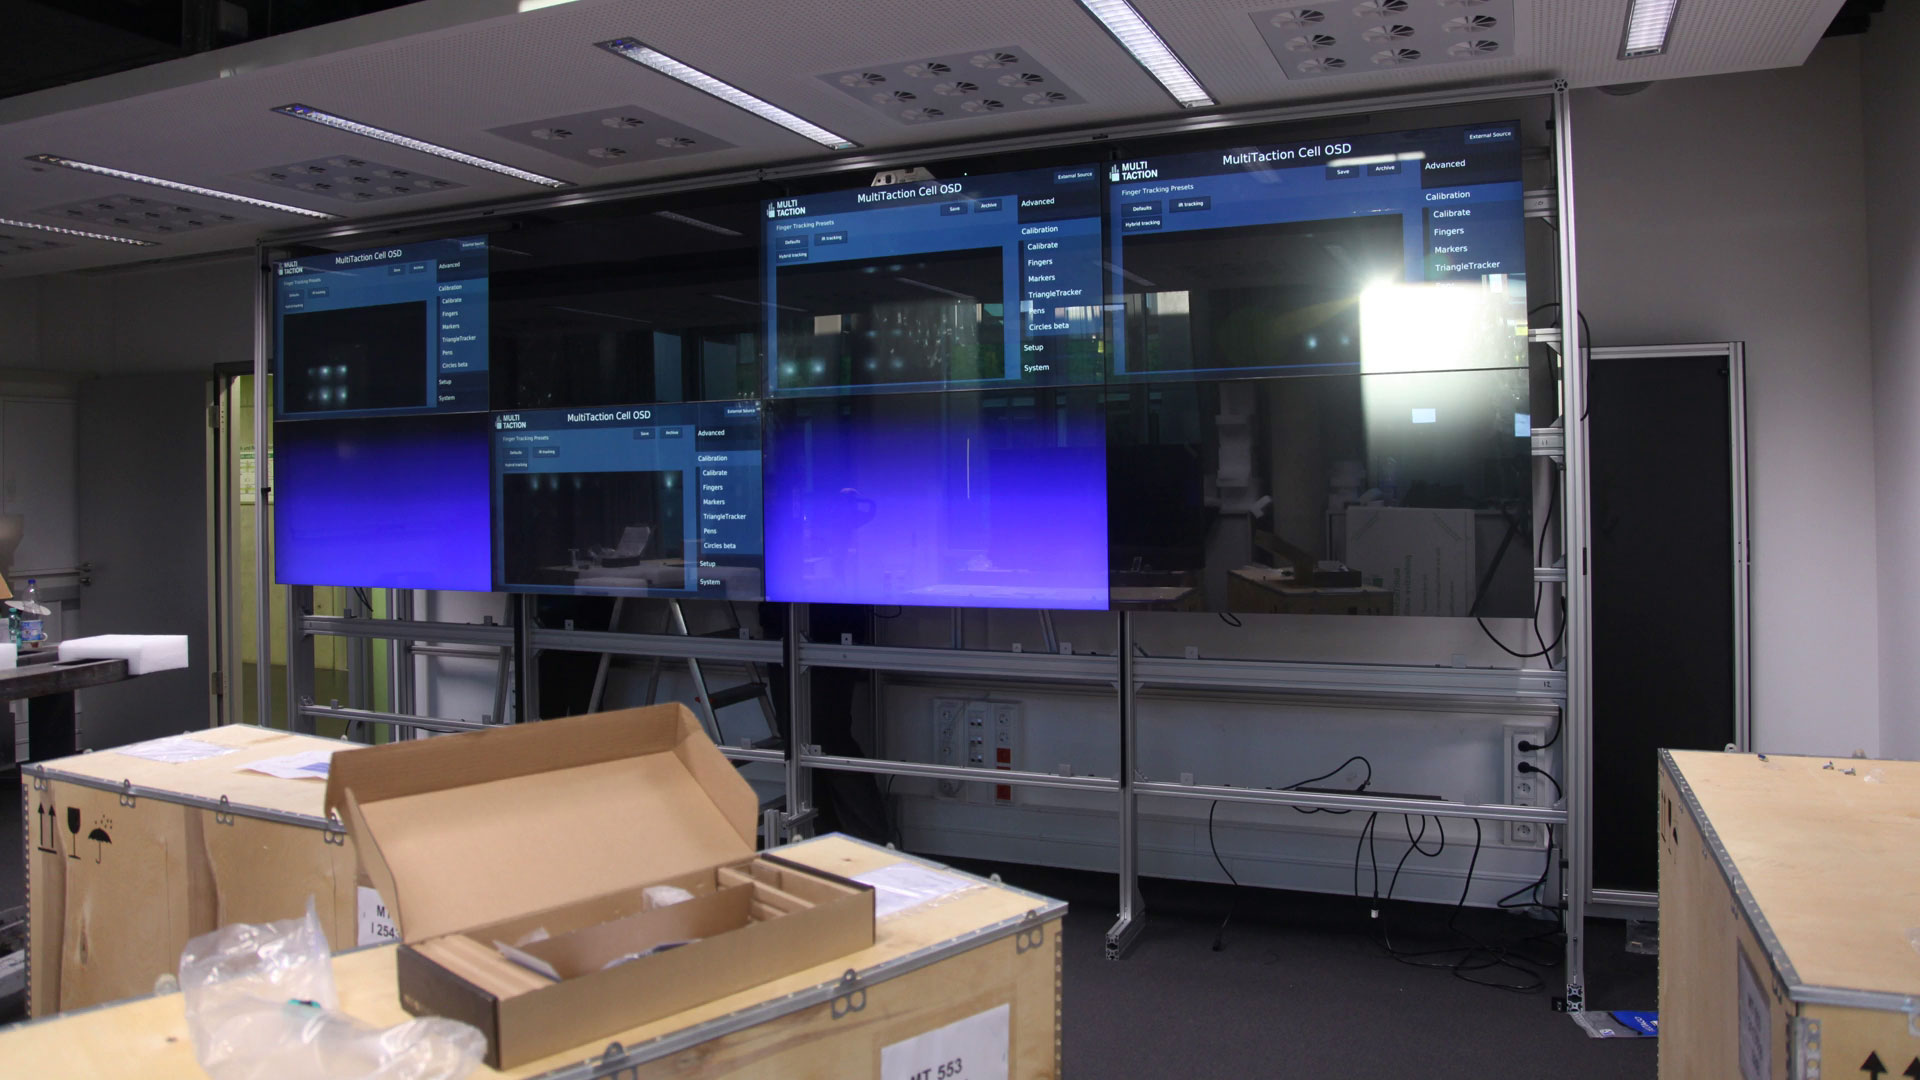 Previewing the full video of the construction of our high-resolution interactive display wall.